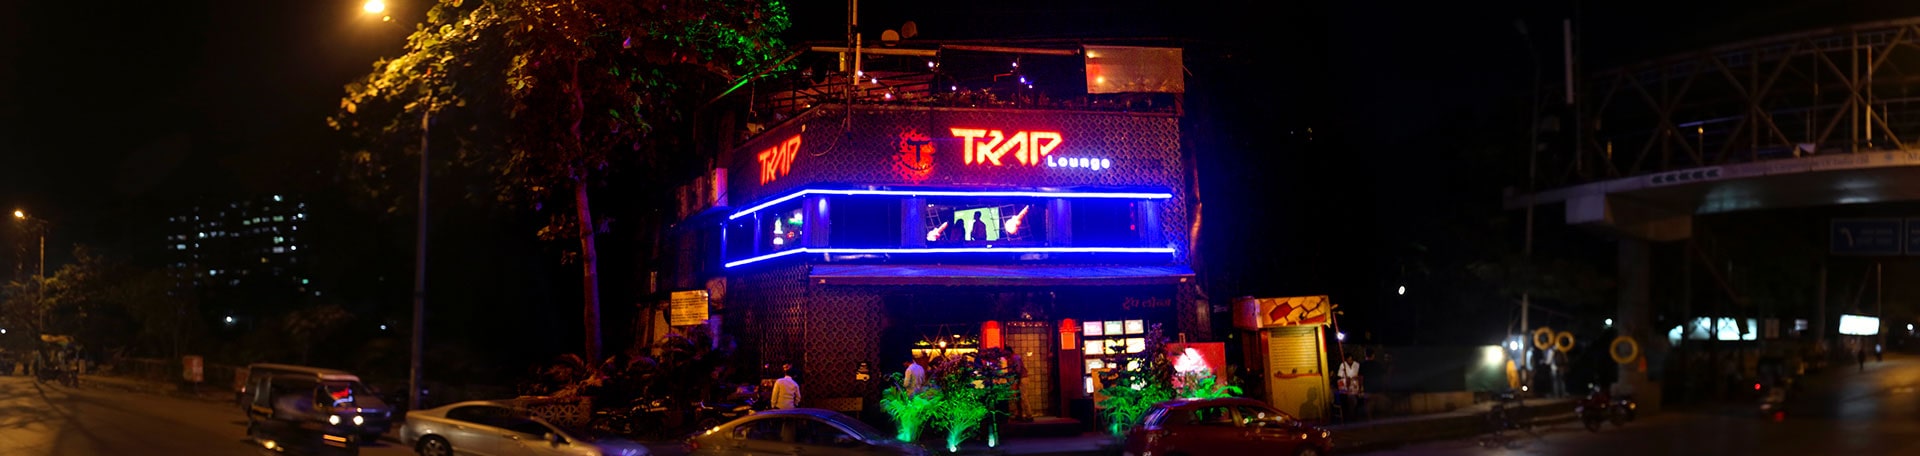 Case Study on Restaurant Advertising for Trap Lounge